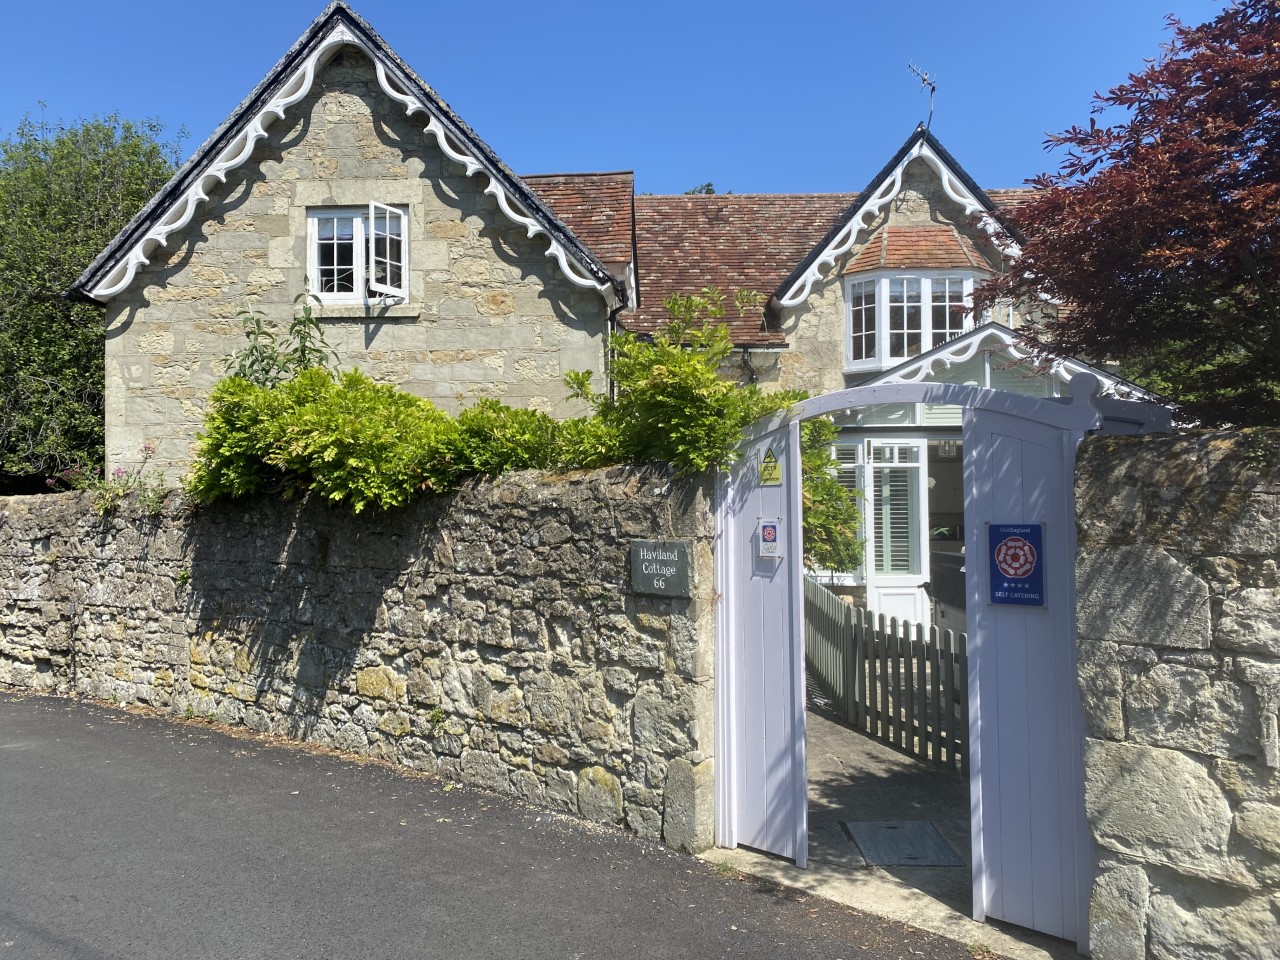 Welcome to Haviland Cottage on the Isle of Wight, located near Ventnor in Bonchurch village